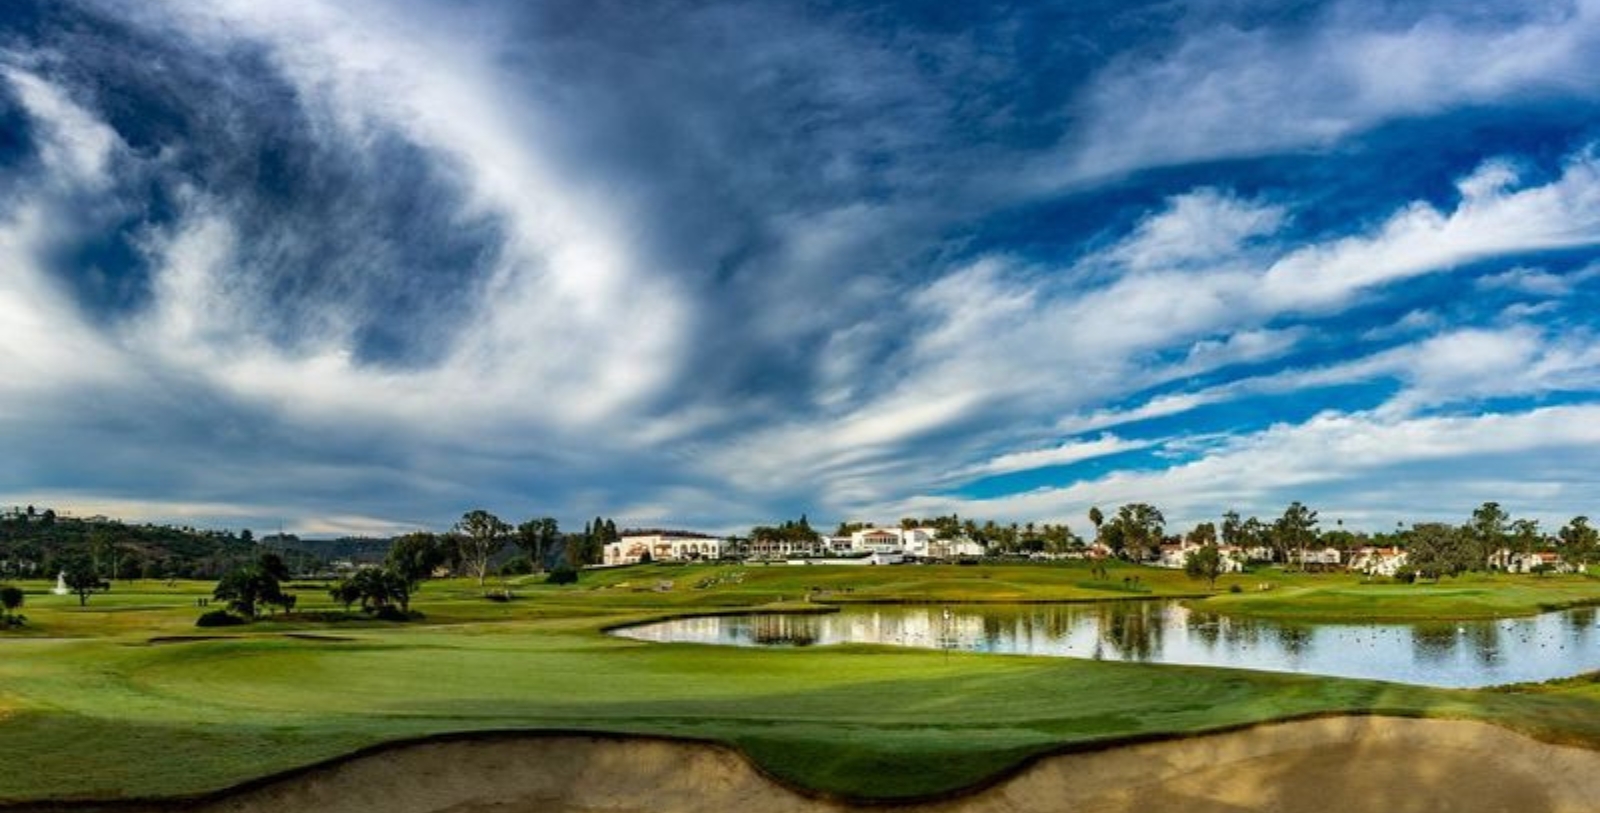 Experience a round of golf or a tennis match on the famous courses and courts of the Omni La Costa Resort.